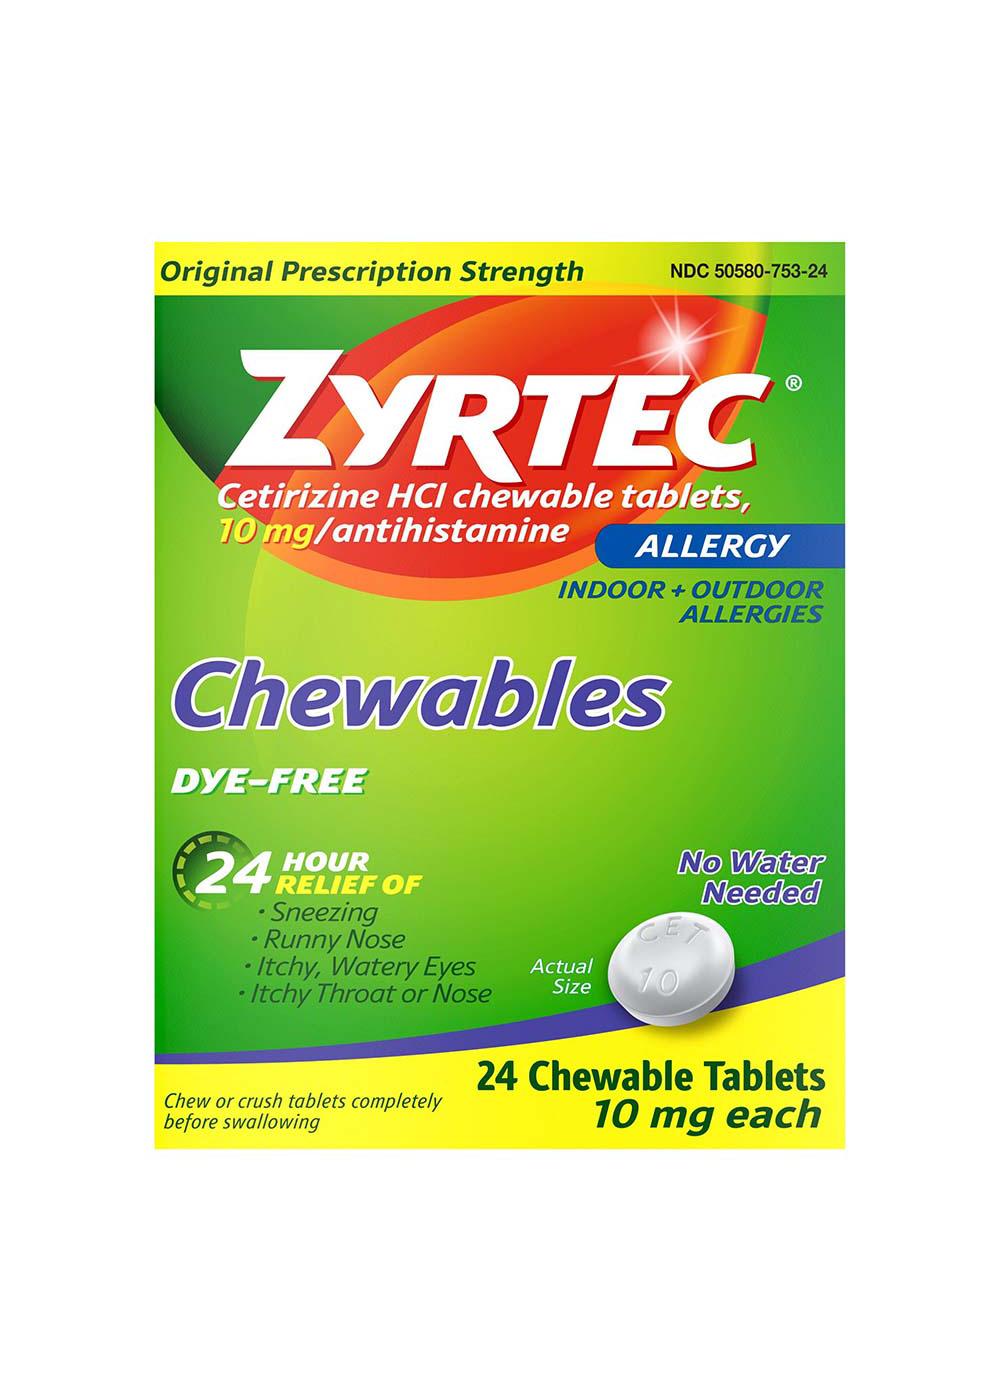 Zyrtec Chewables Allergy 24 Hour Relief Tablets; image 1 of 2